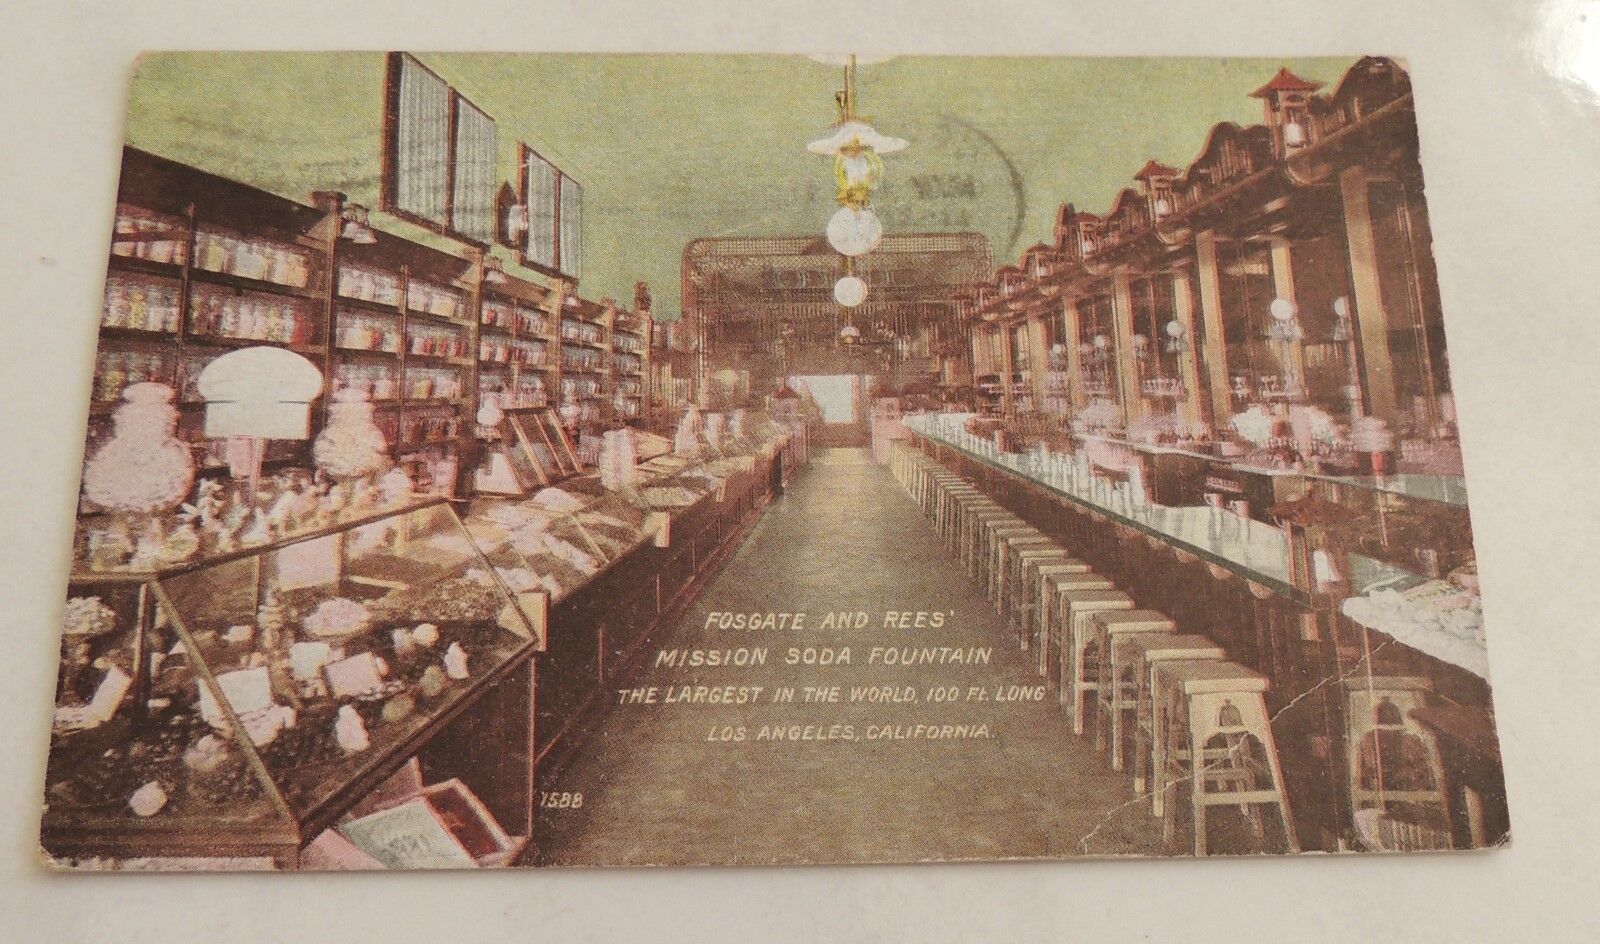 Fosgate and Rees MISSION soda fountain Los Angeles CA antique postcard 1910 